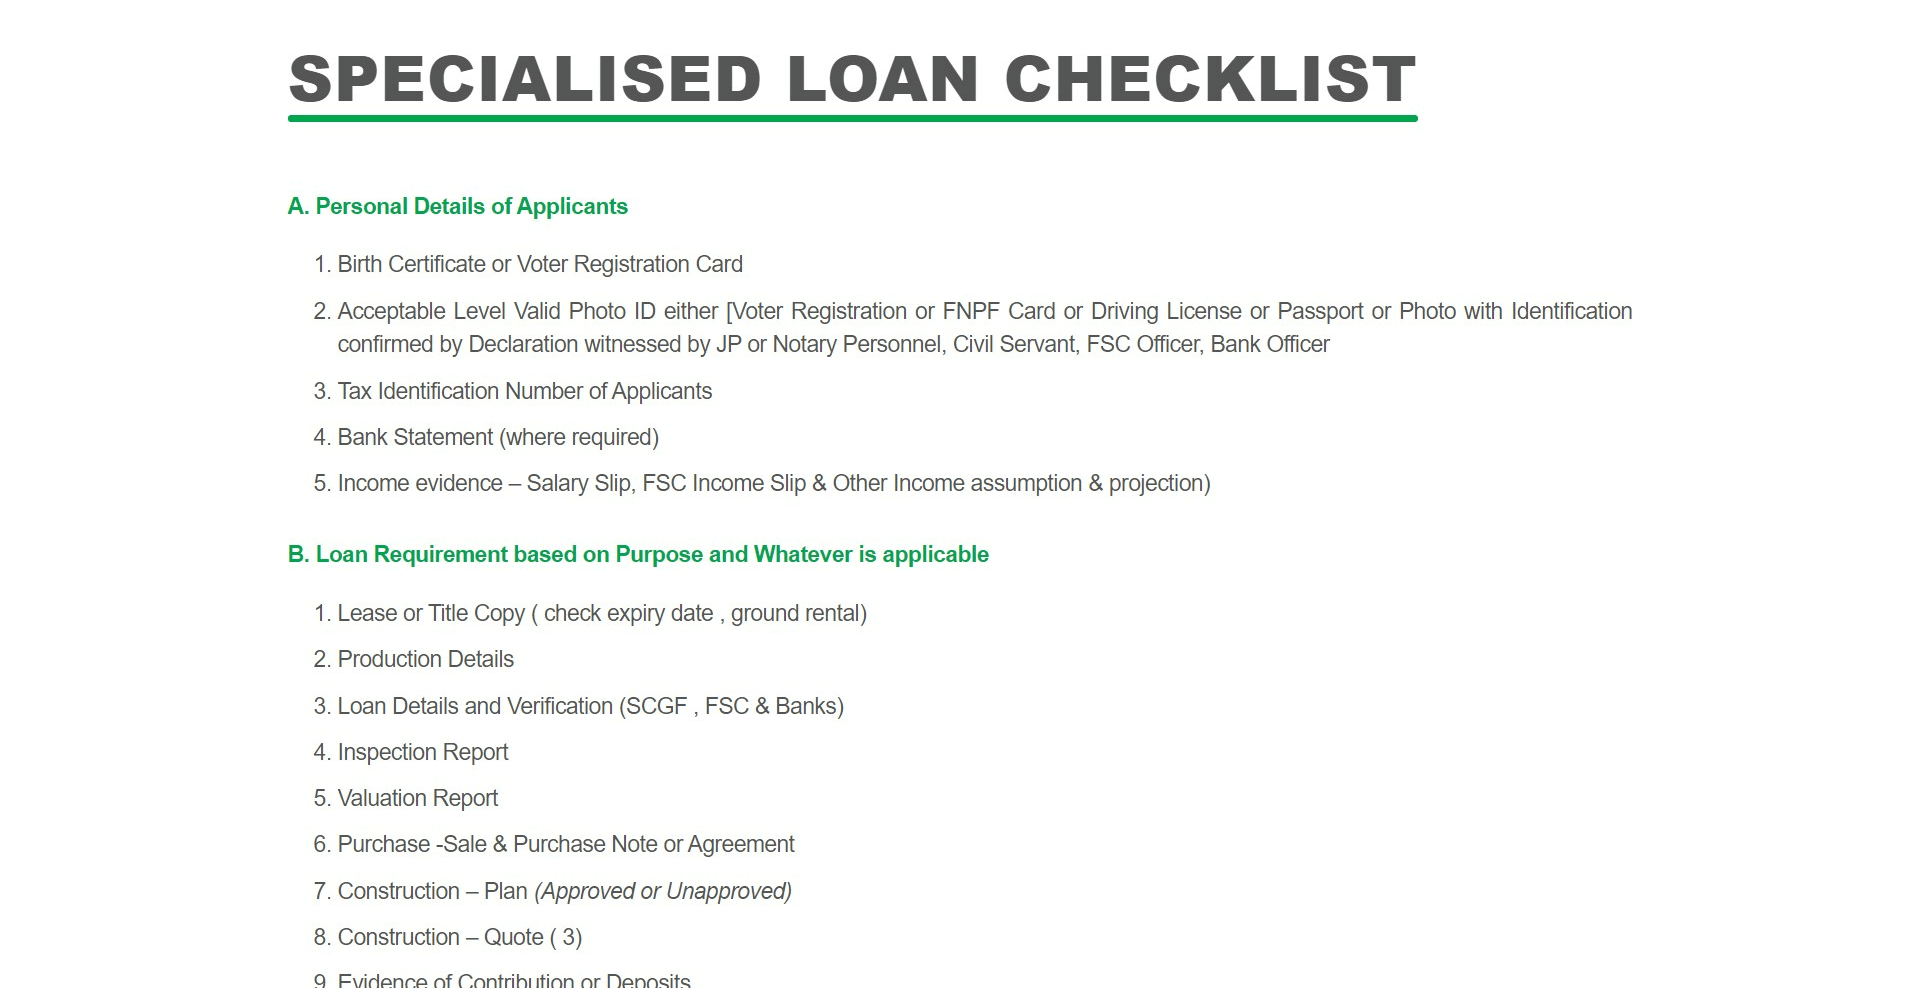 Specialised Loan Checklist